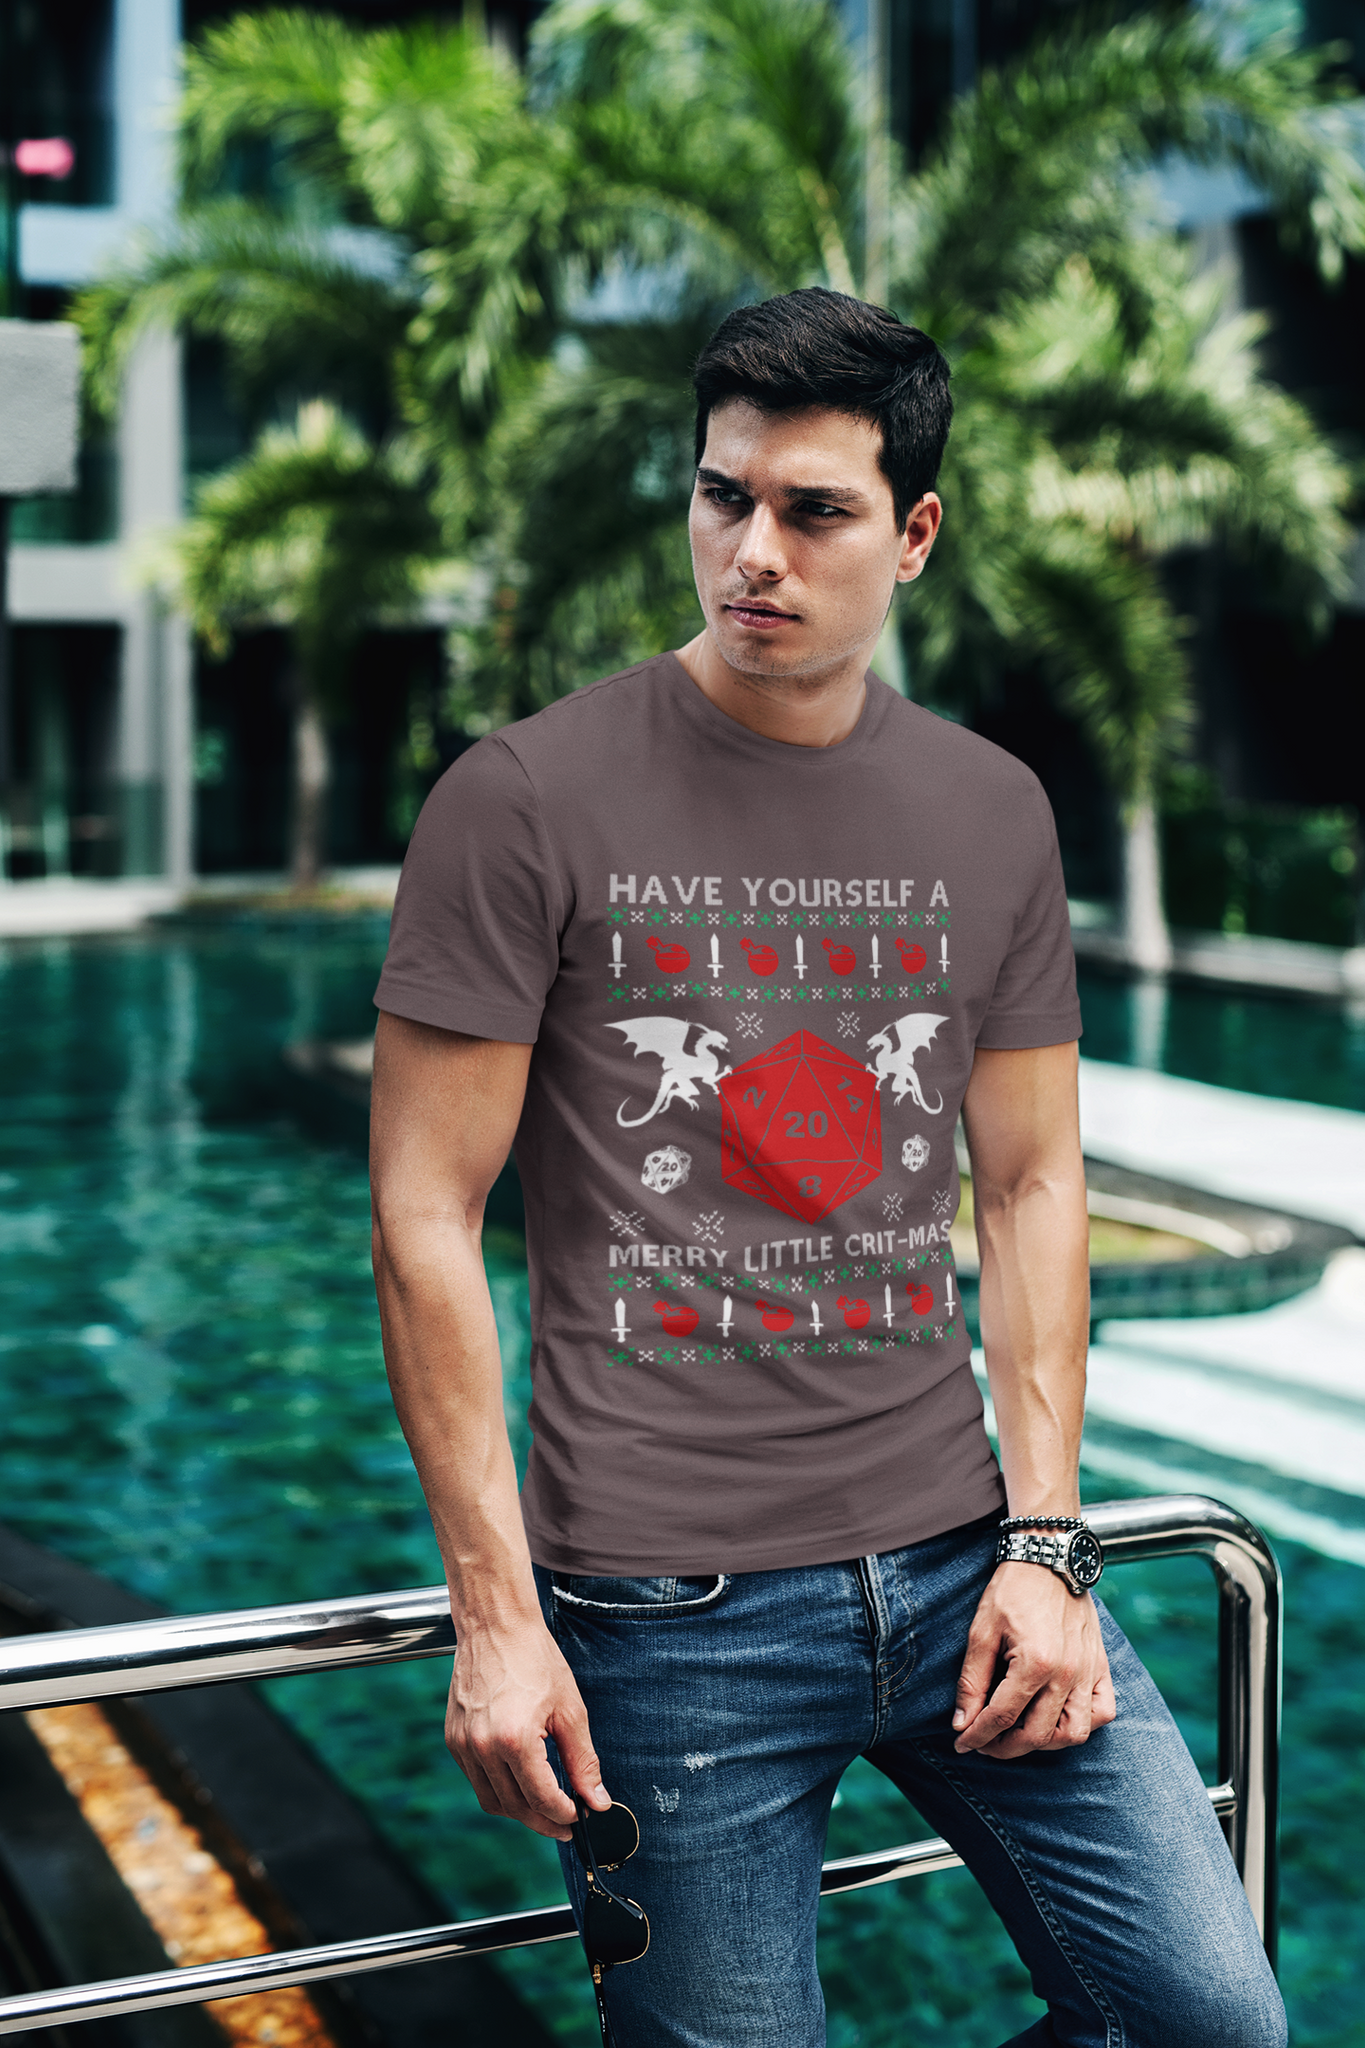 Dungeon And Dragon T Shirt, Have Yourself A Merry Little Crit Mas DND T Shirt, RPG Dice Games Tshirt